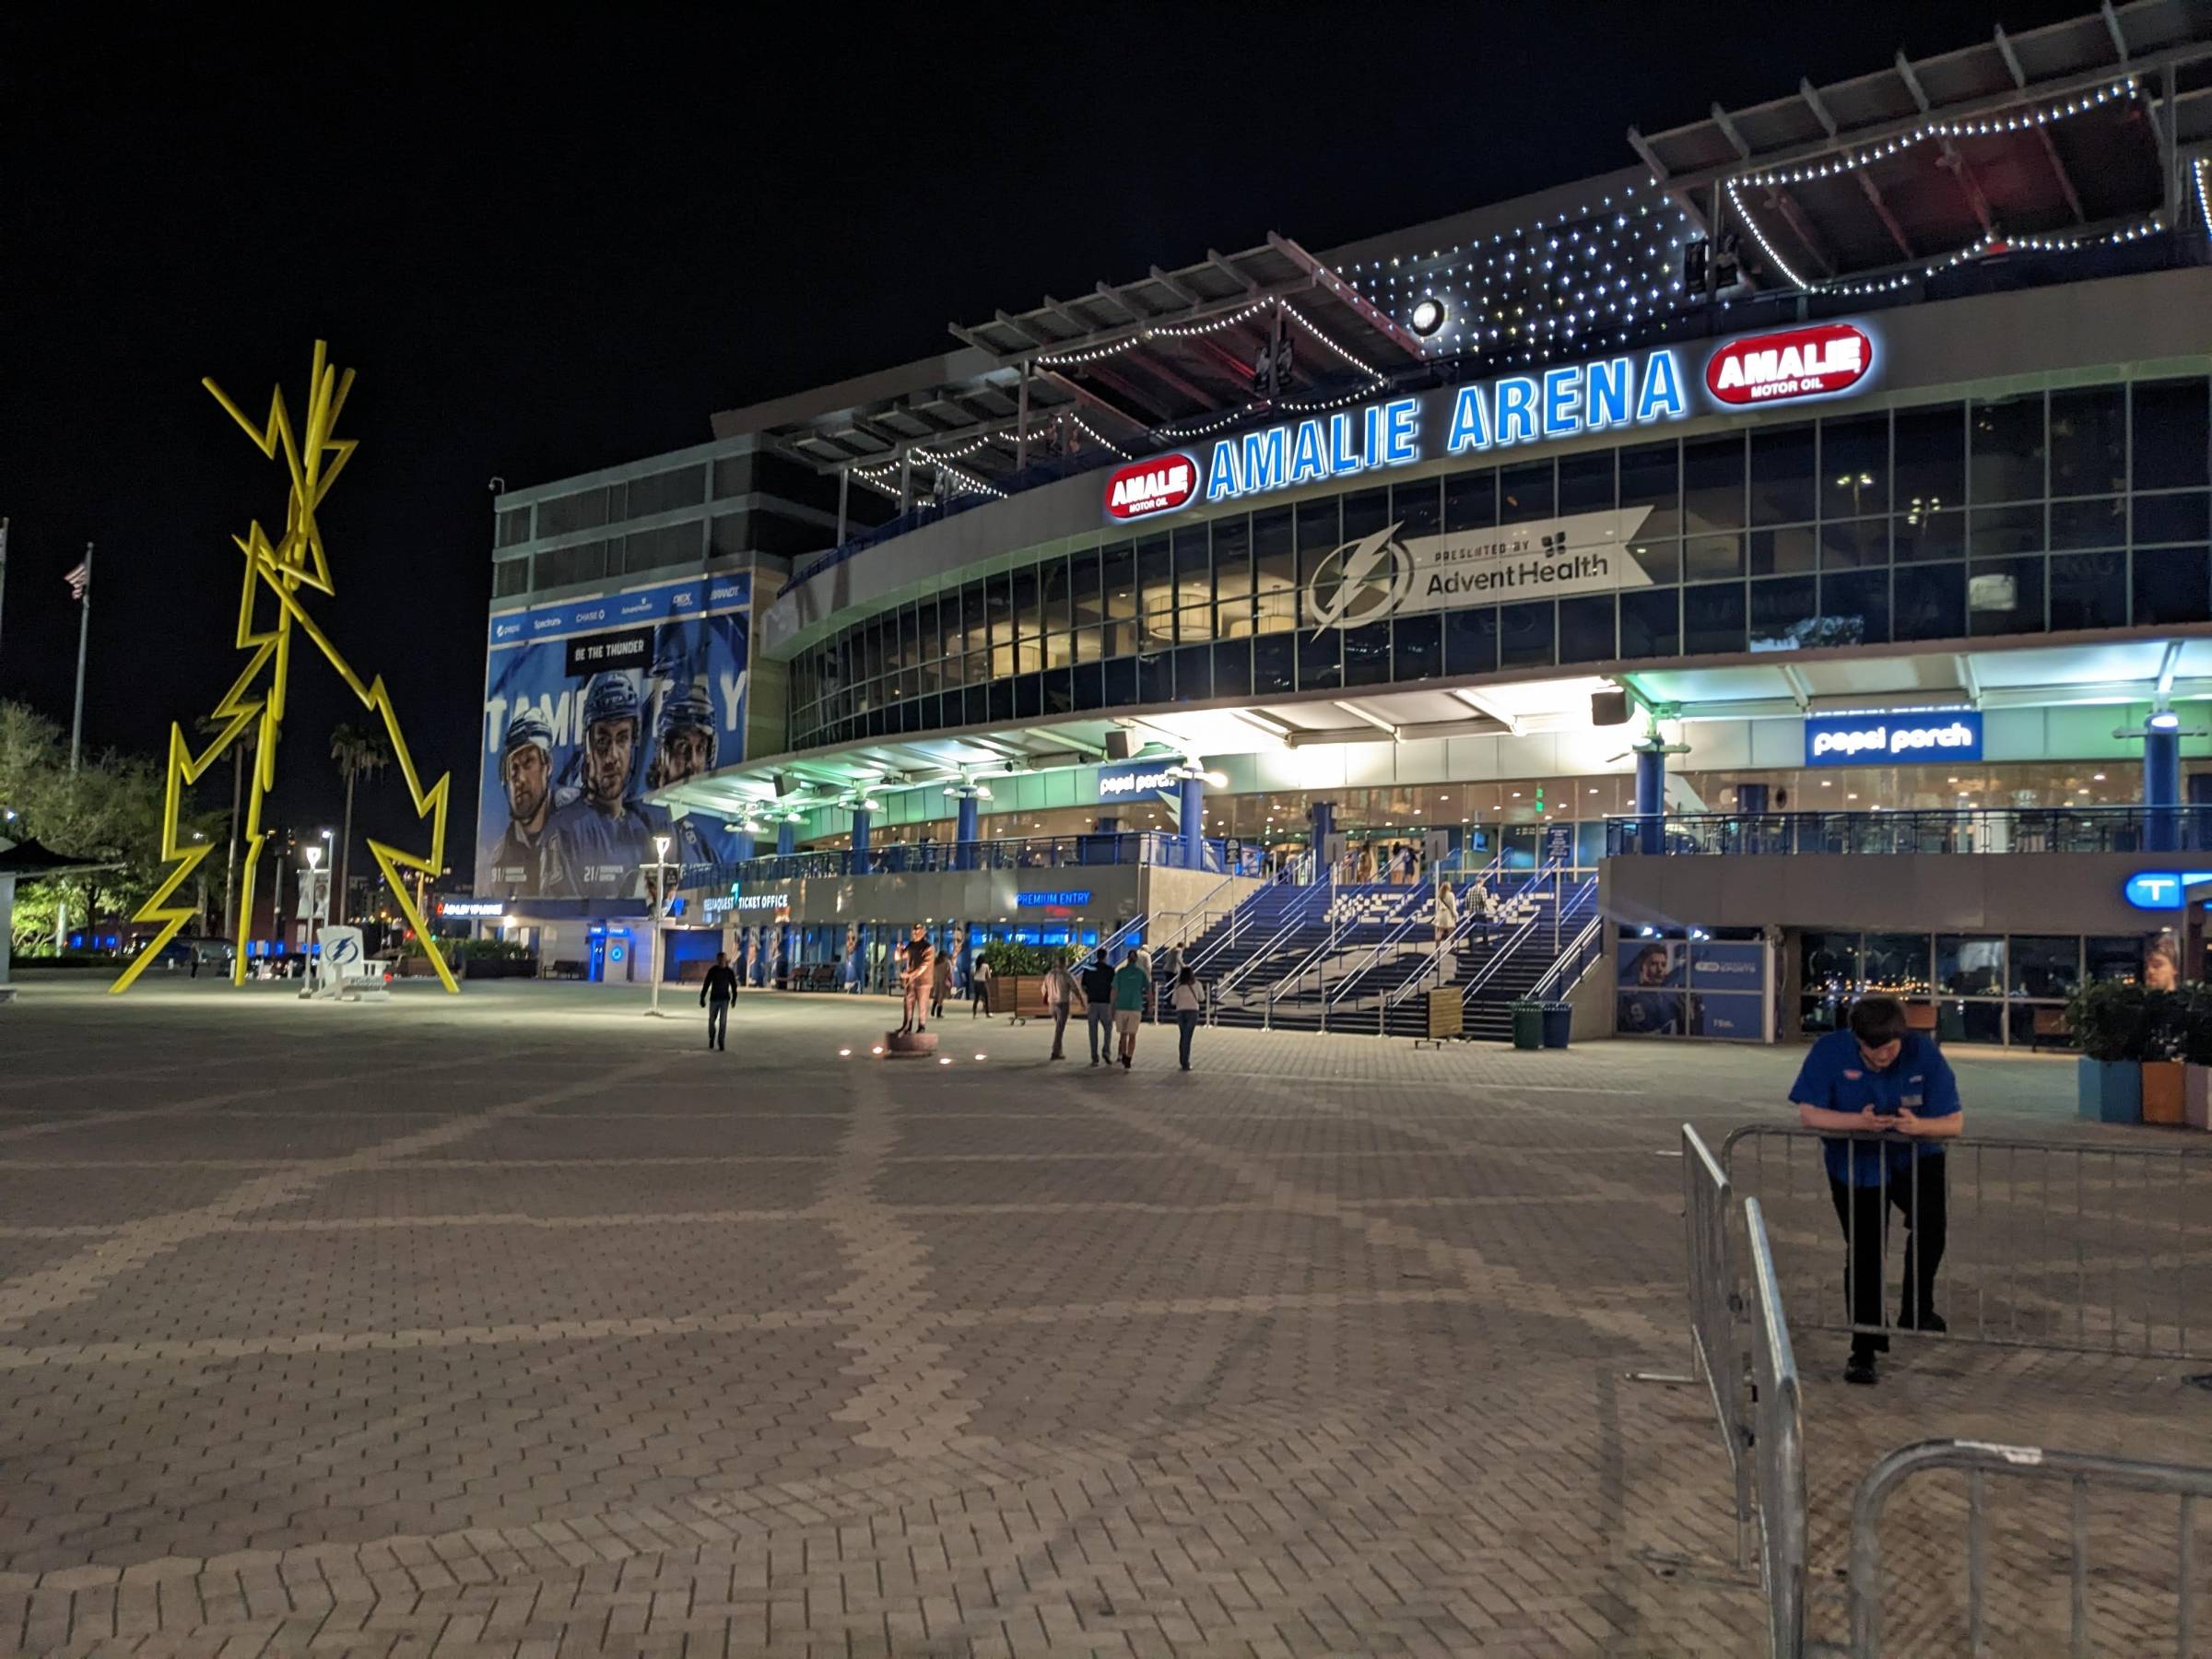 Amalie Arena's fixed stadium seating manufactured by Irwin Seating